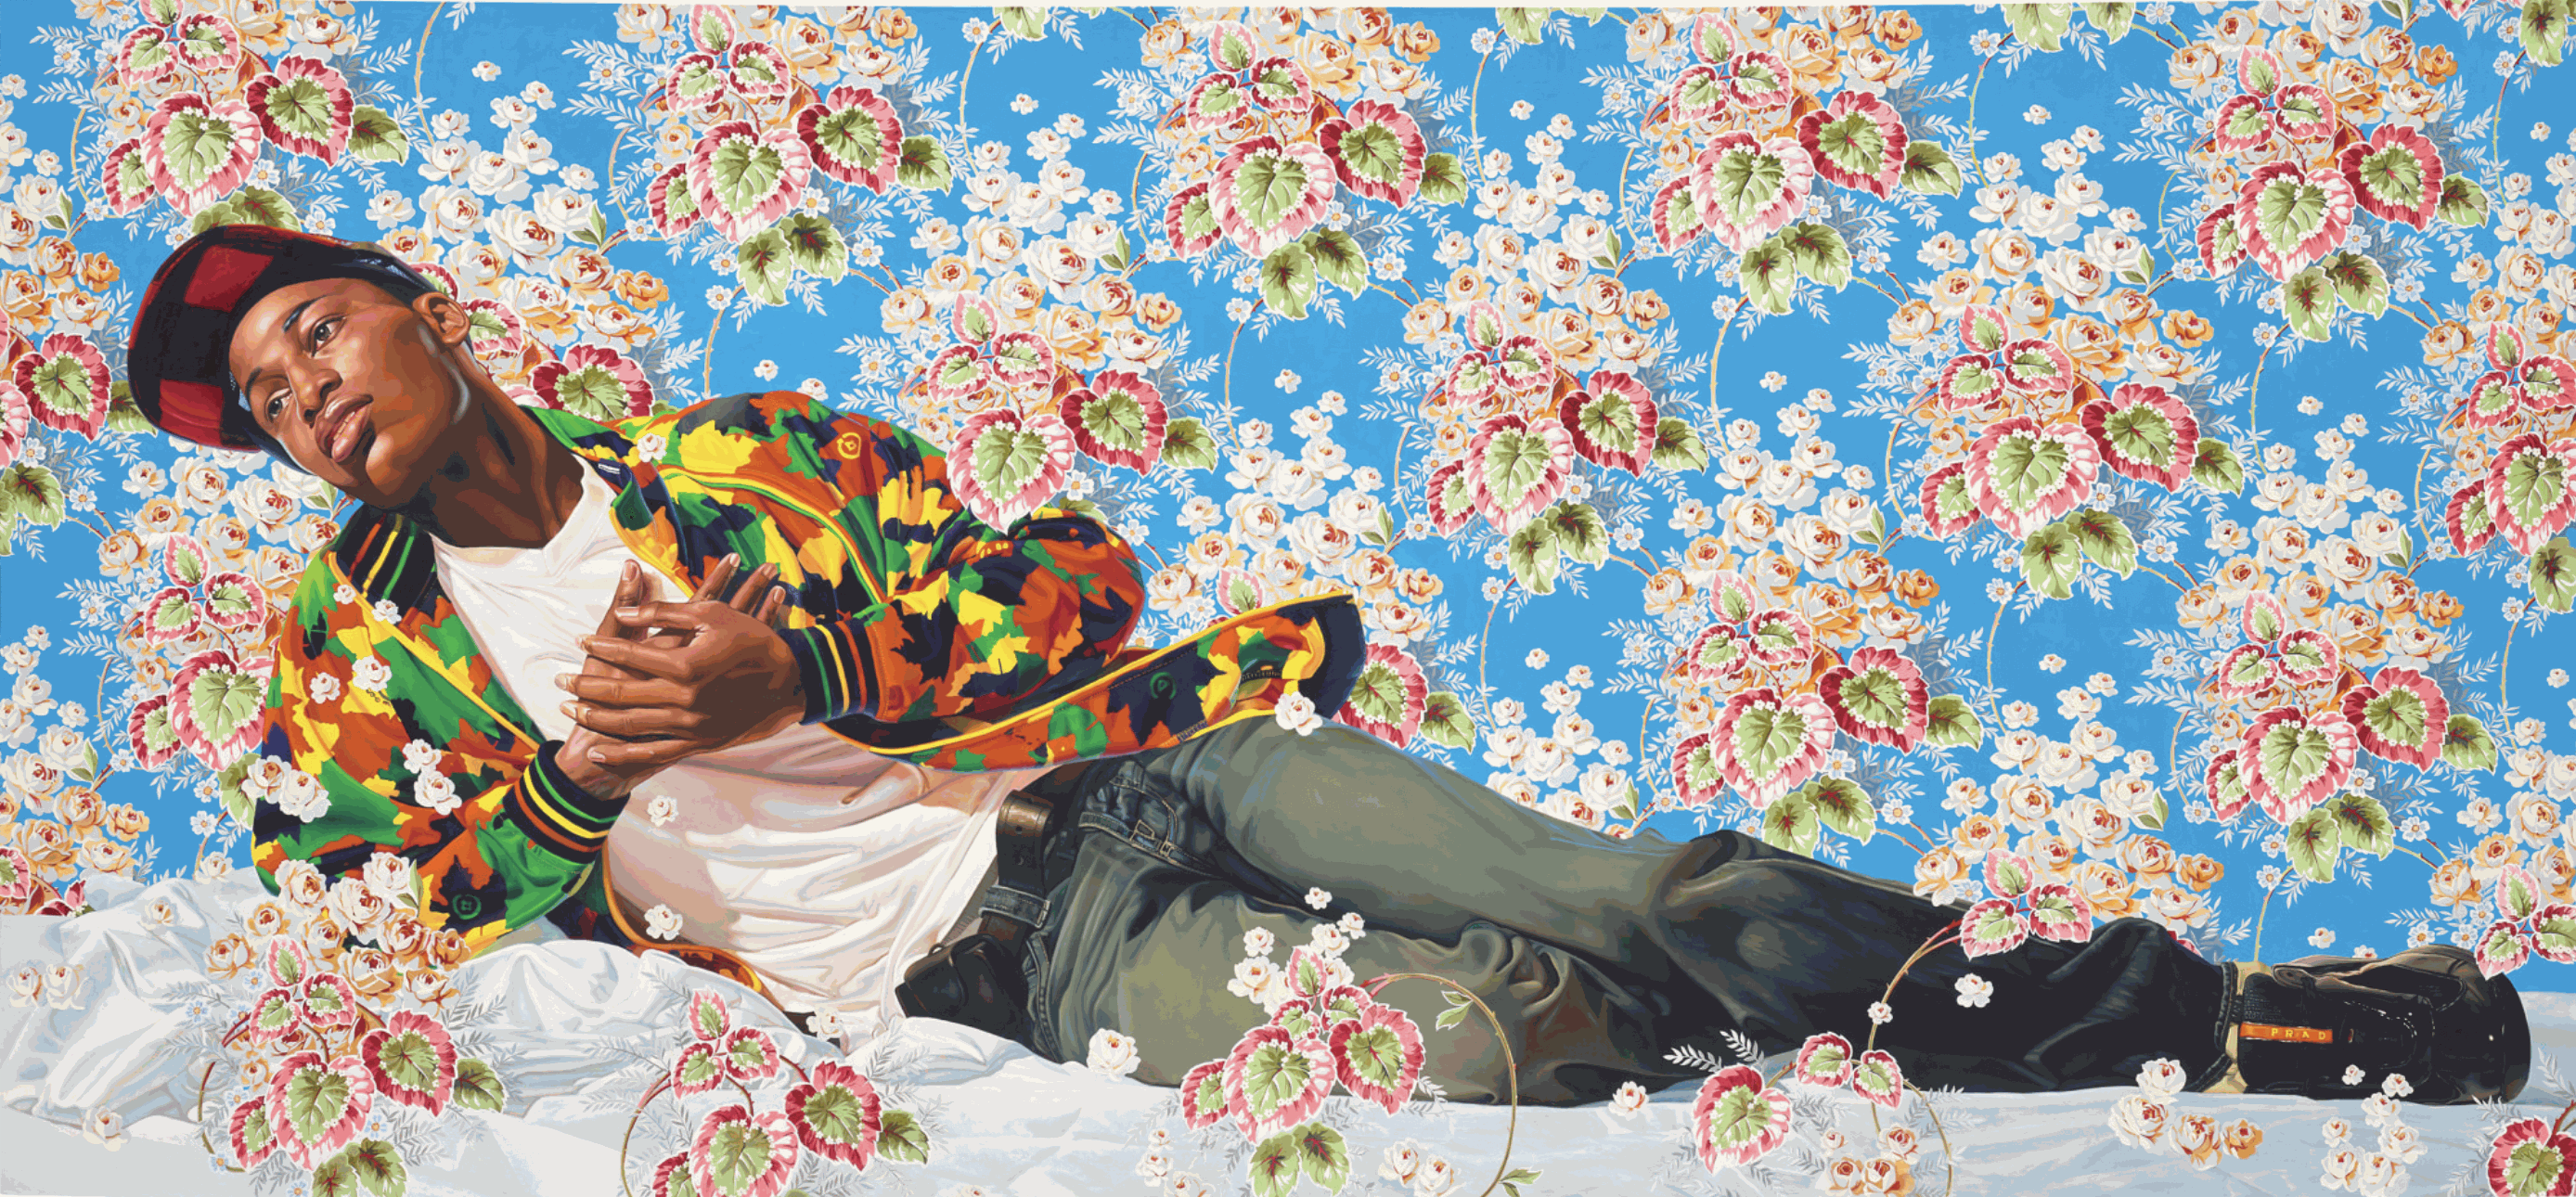 Kehinde Wiley's monumental 'Christian Martyr Tarcisius' achieved a new auction high at Phillips, selling for £660,400, and confirming the artist's ascending market trajectory.